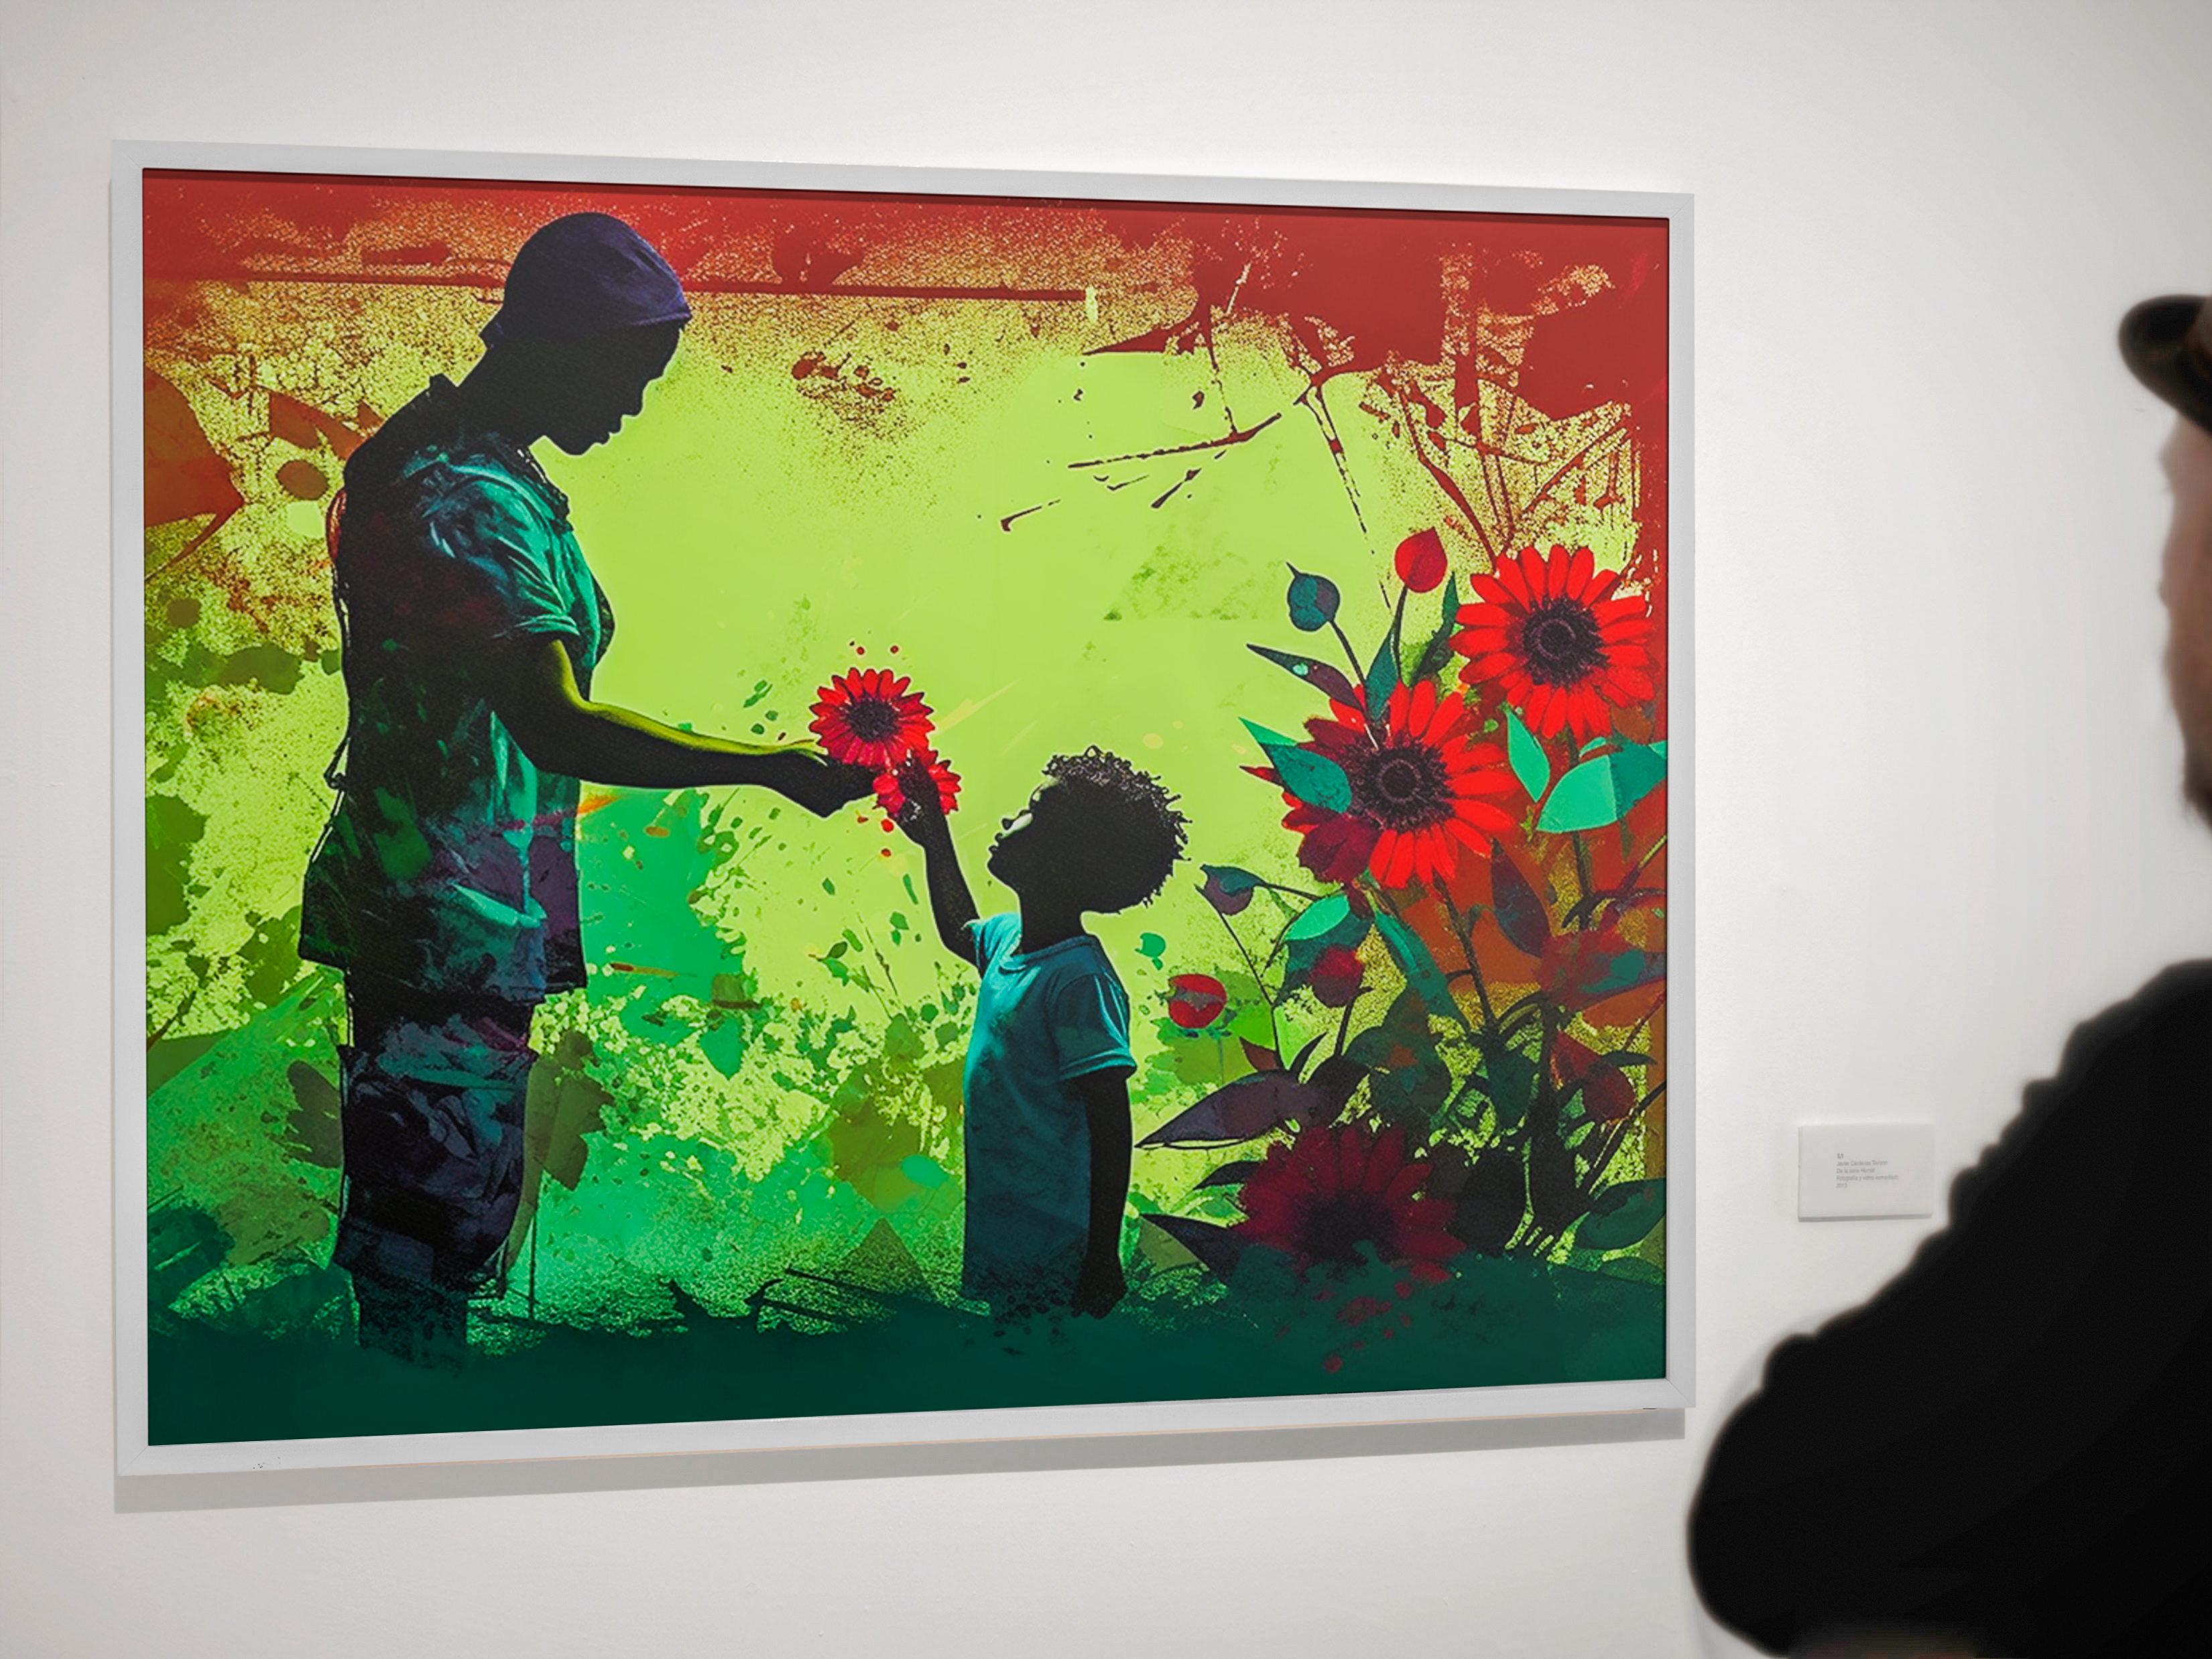 "FATHER AND FLOWERS" - African American Themed Poster Wall Art